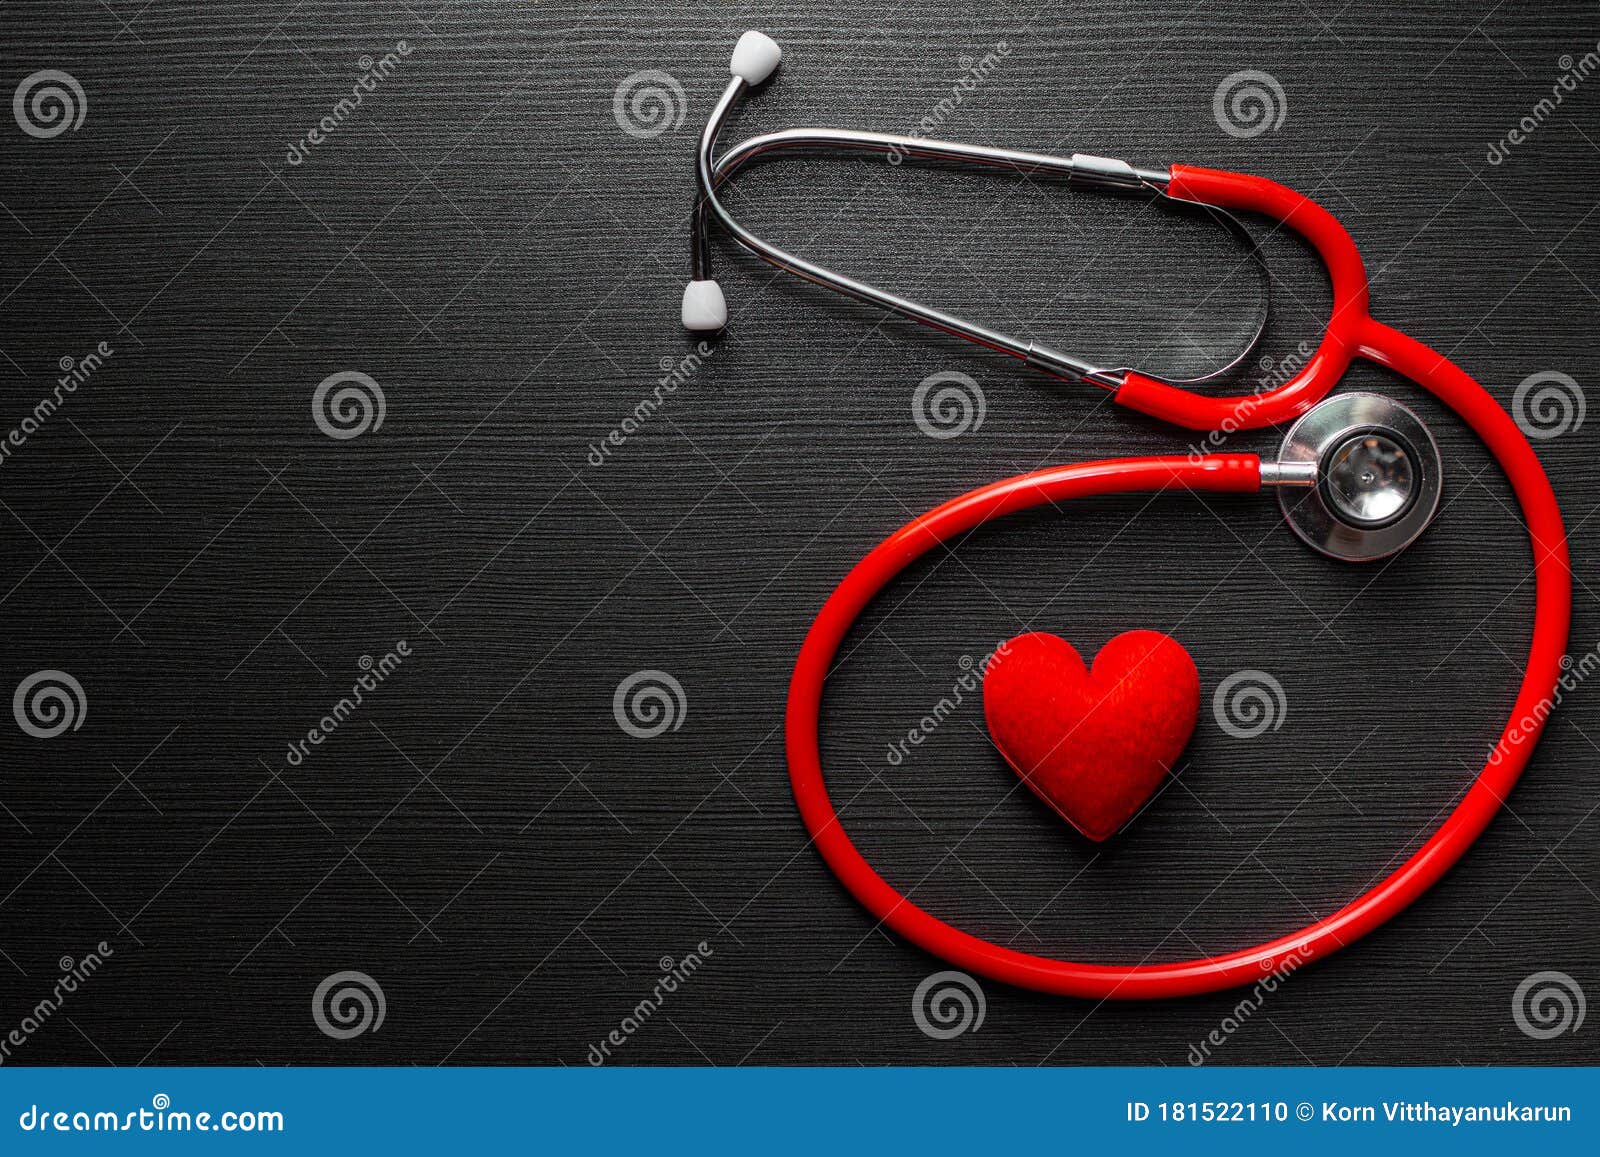 Stethoscope Doctor with Red Heart on Black Wooden Table Background with  Space for Text Stock Photo - Image of backdrop, instrument: 181522110